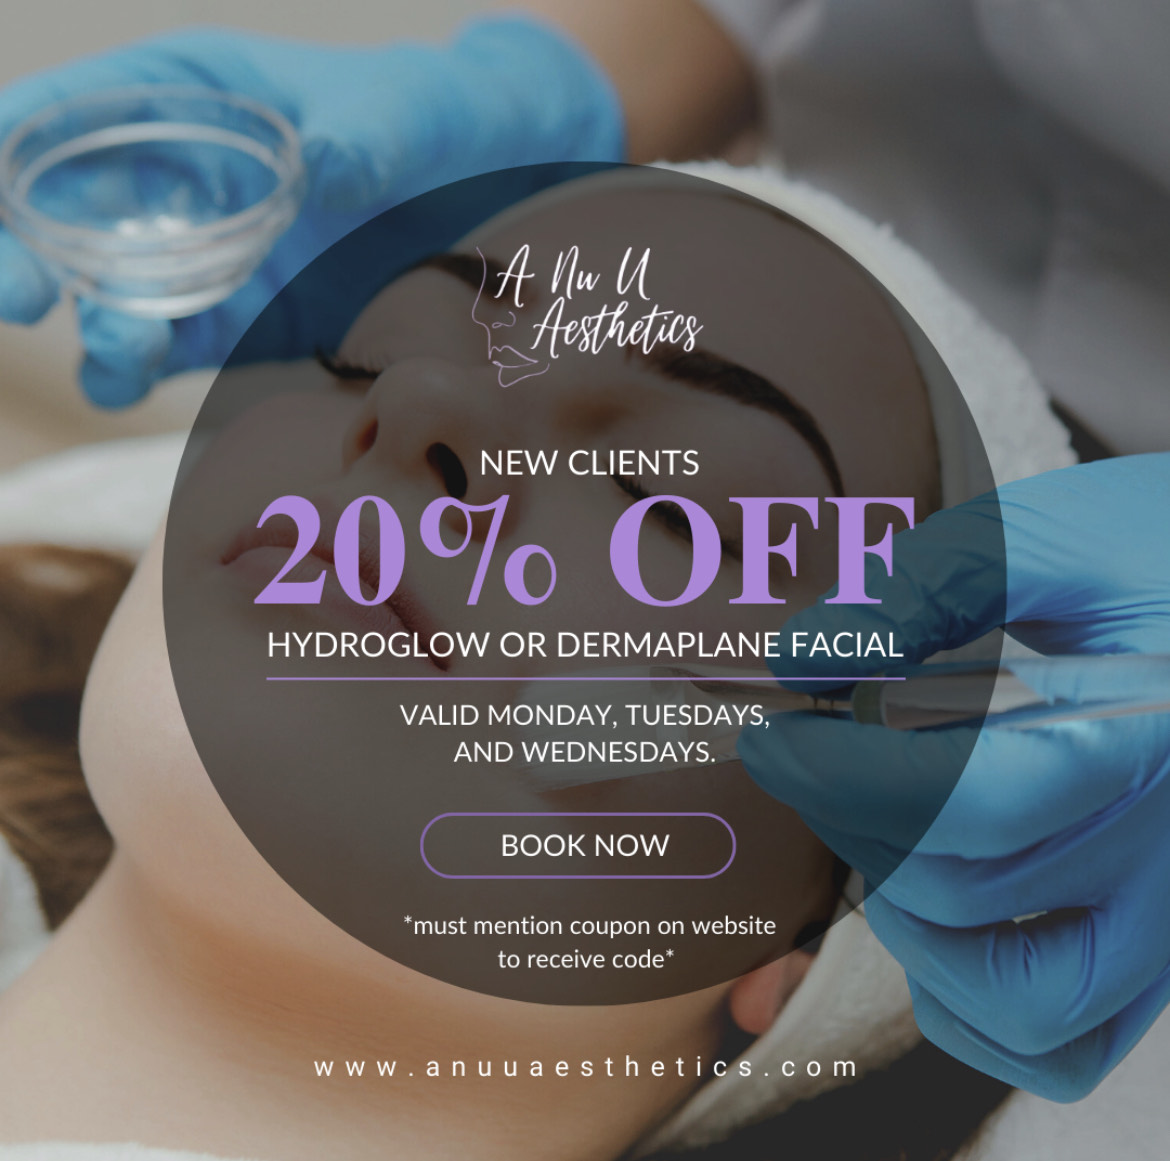 Best Medical Spa In Congers, NY | A Nu U Aesthetics